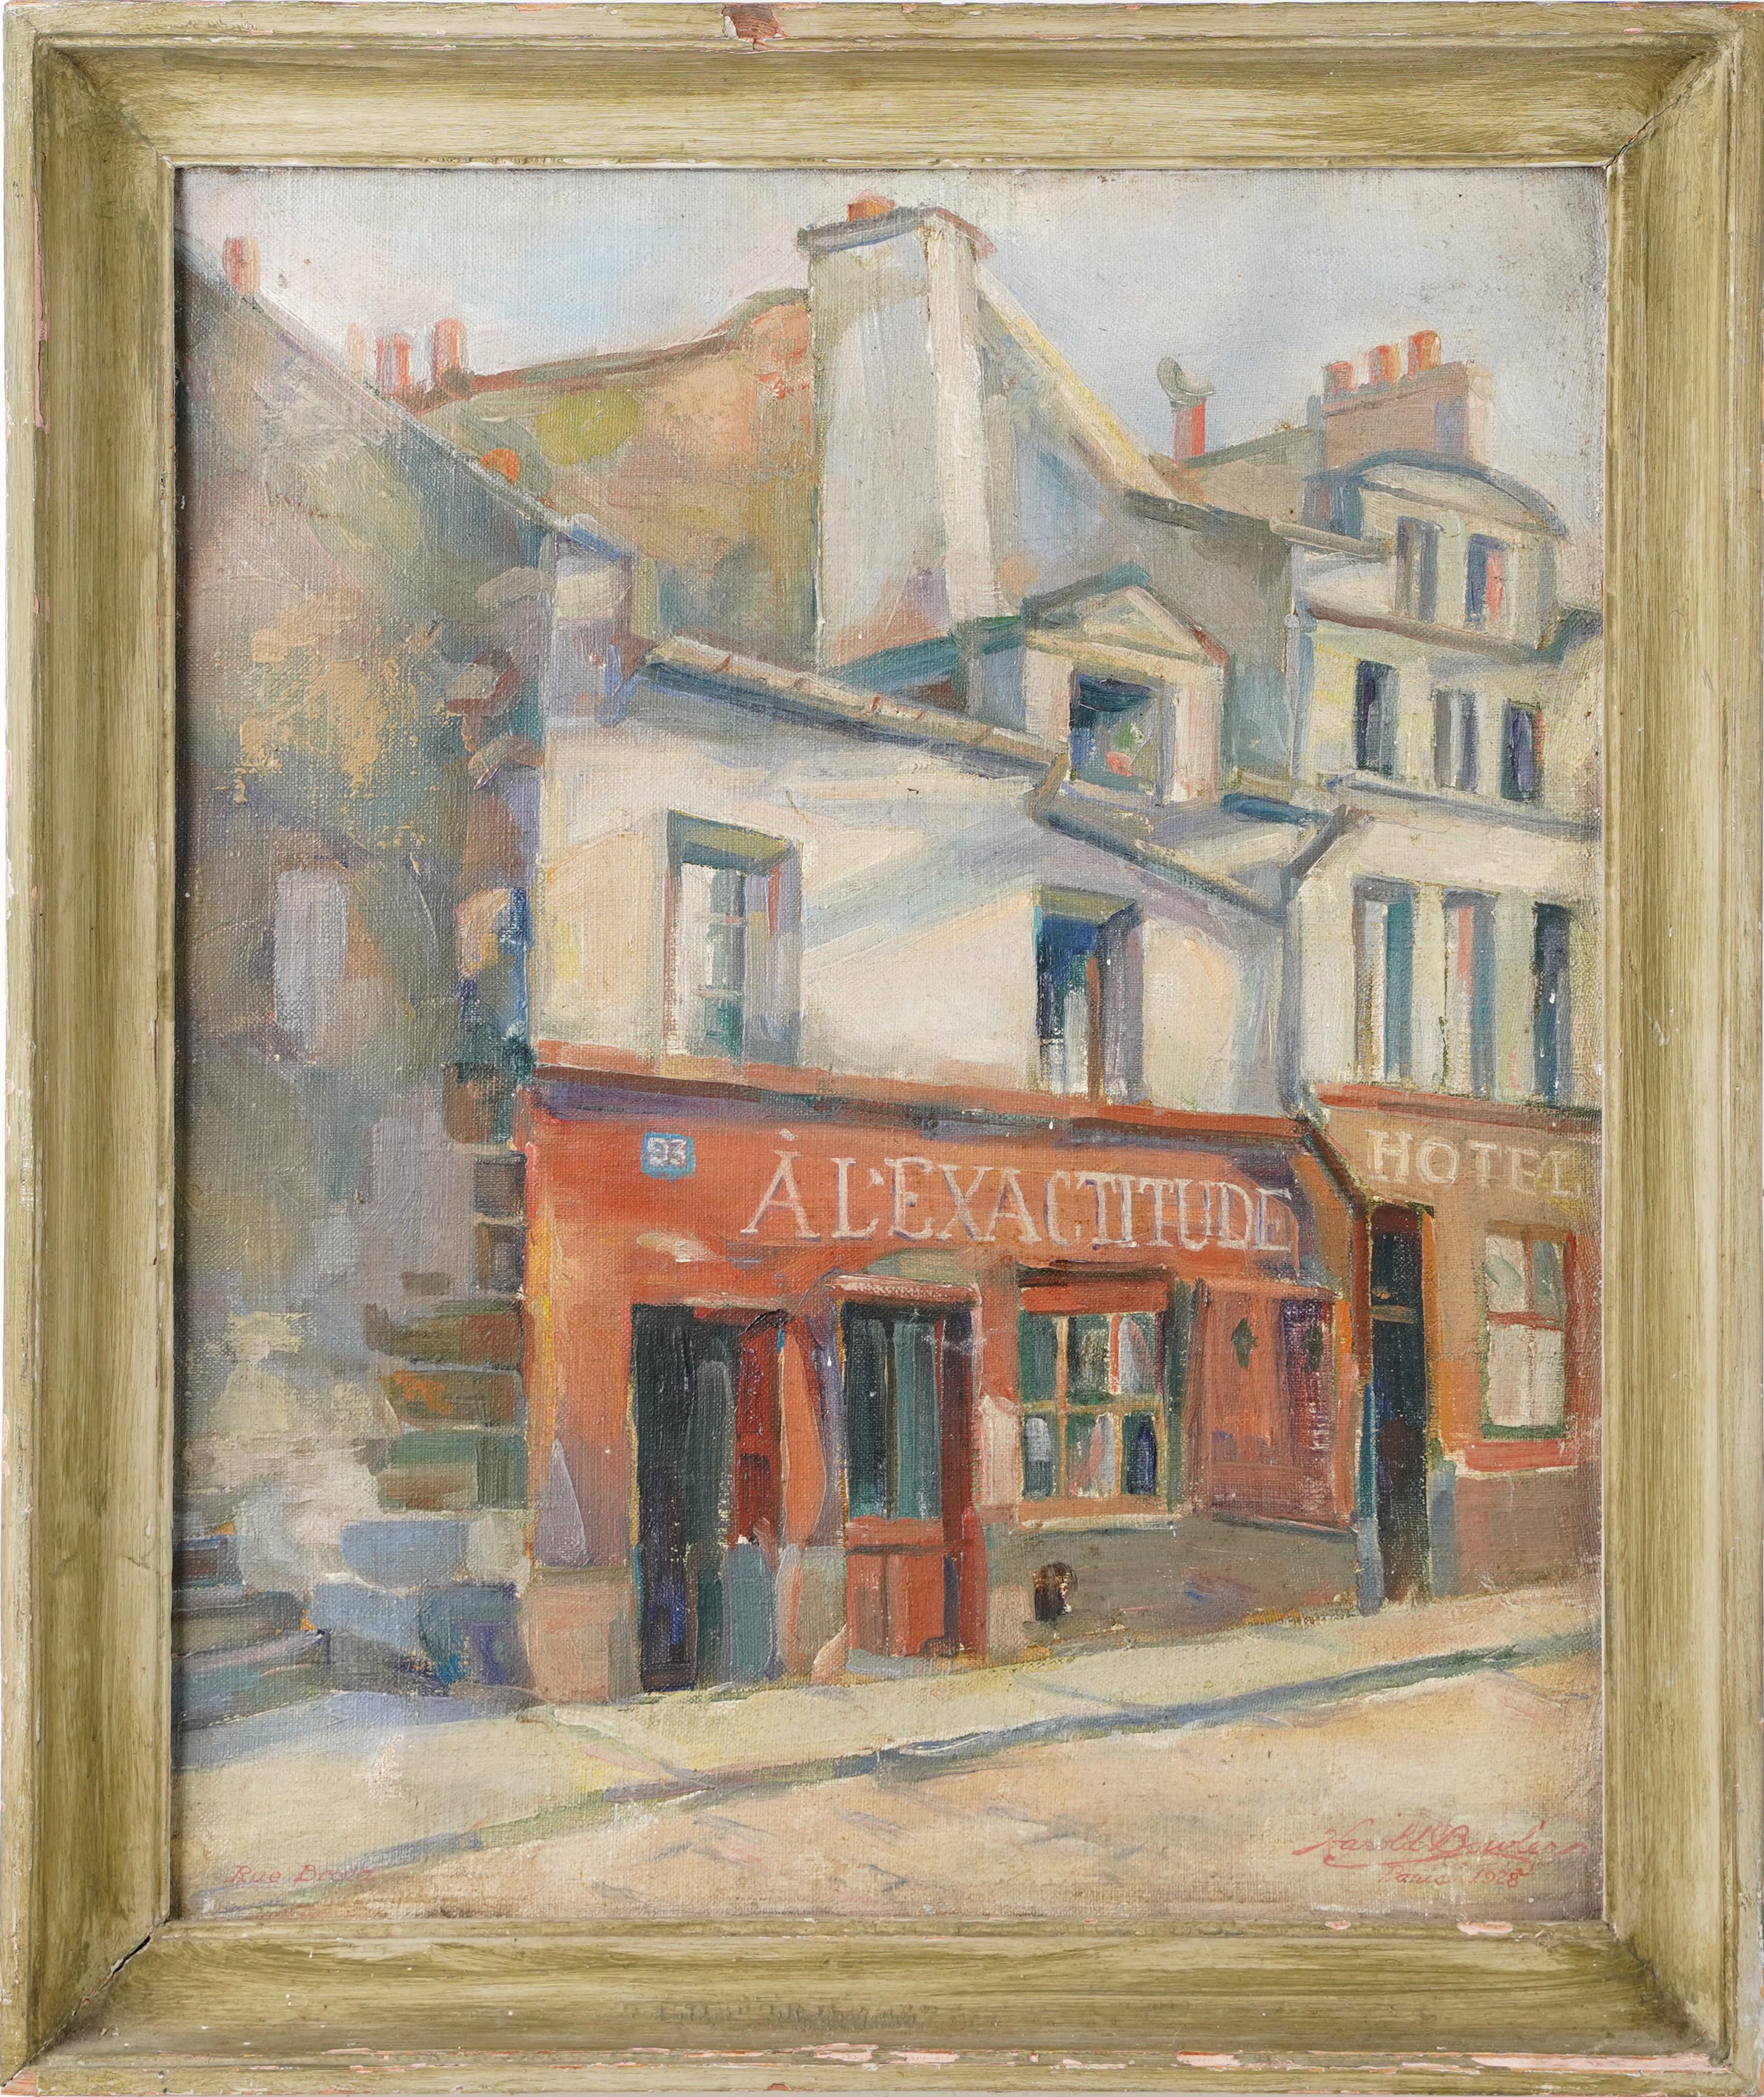  Antique American Impressionist in Paris Signed Street Scene Framed Oil Painting - Brown Abstract Painting by Harold T. Bowler 